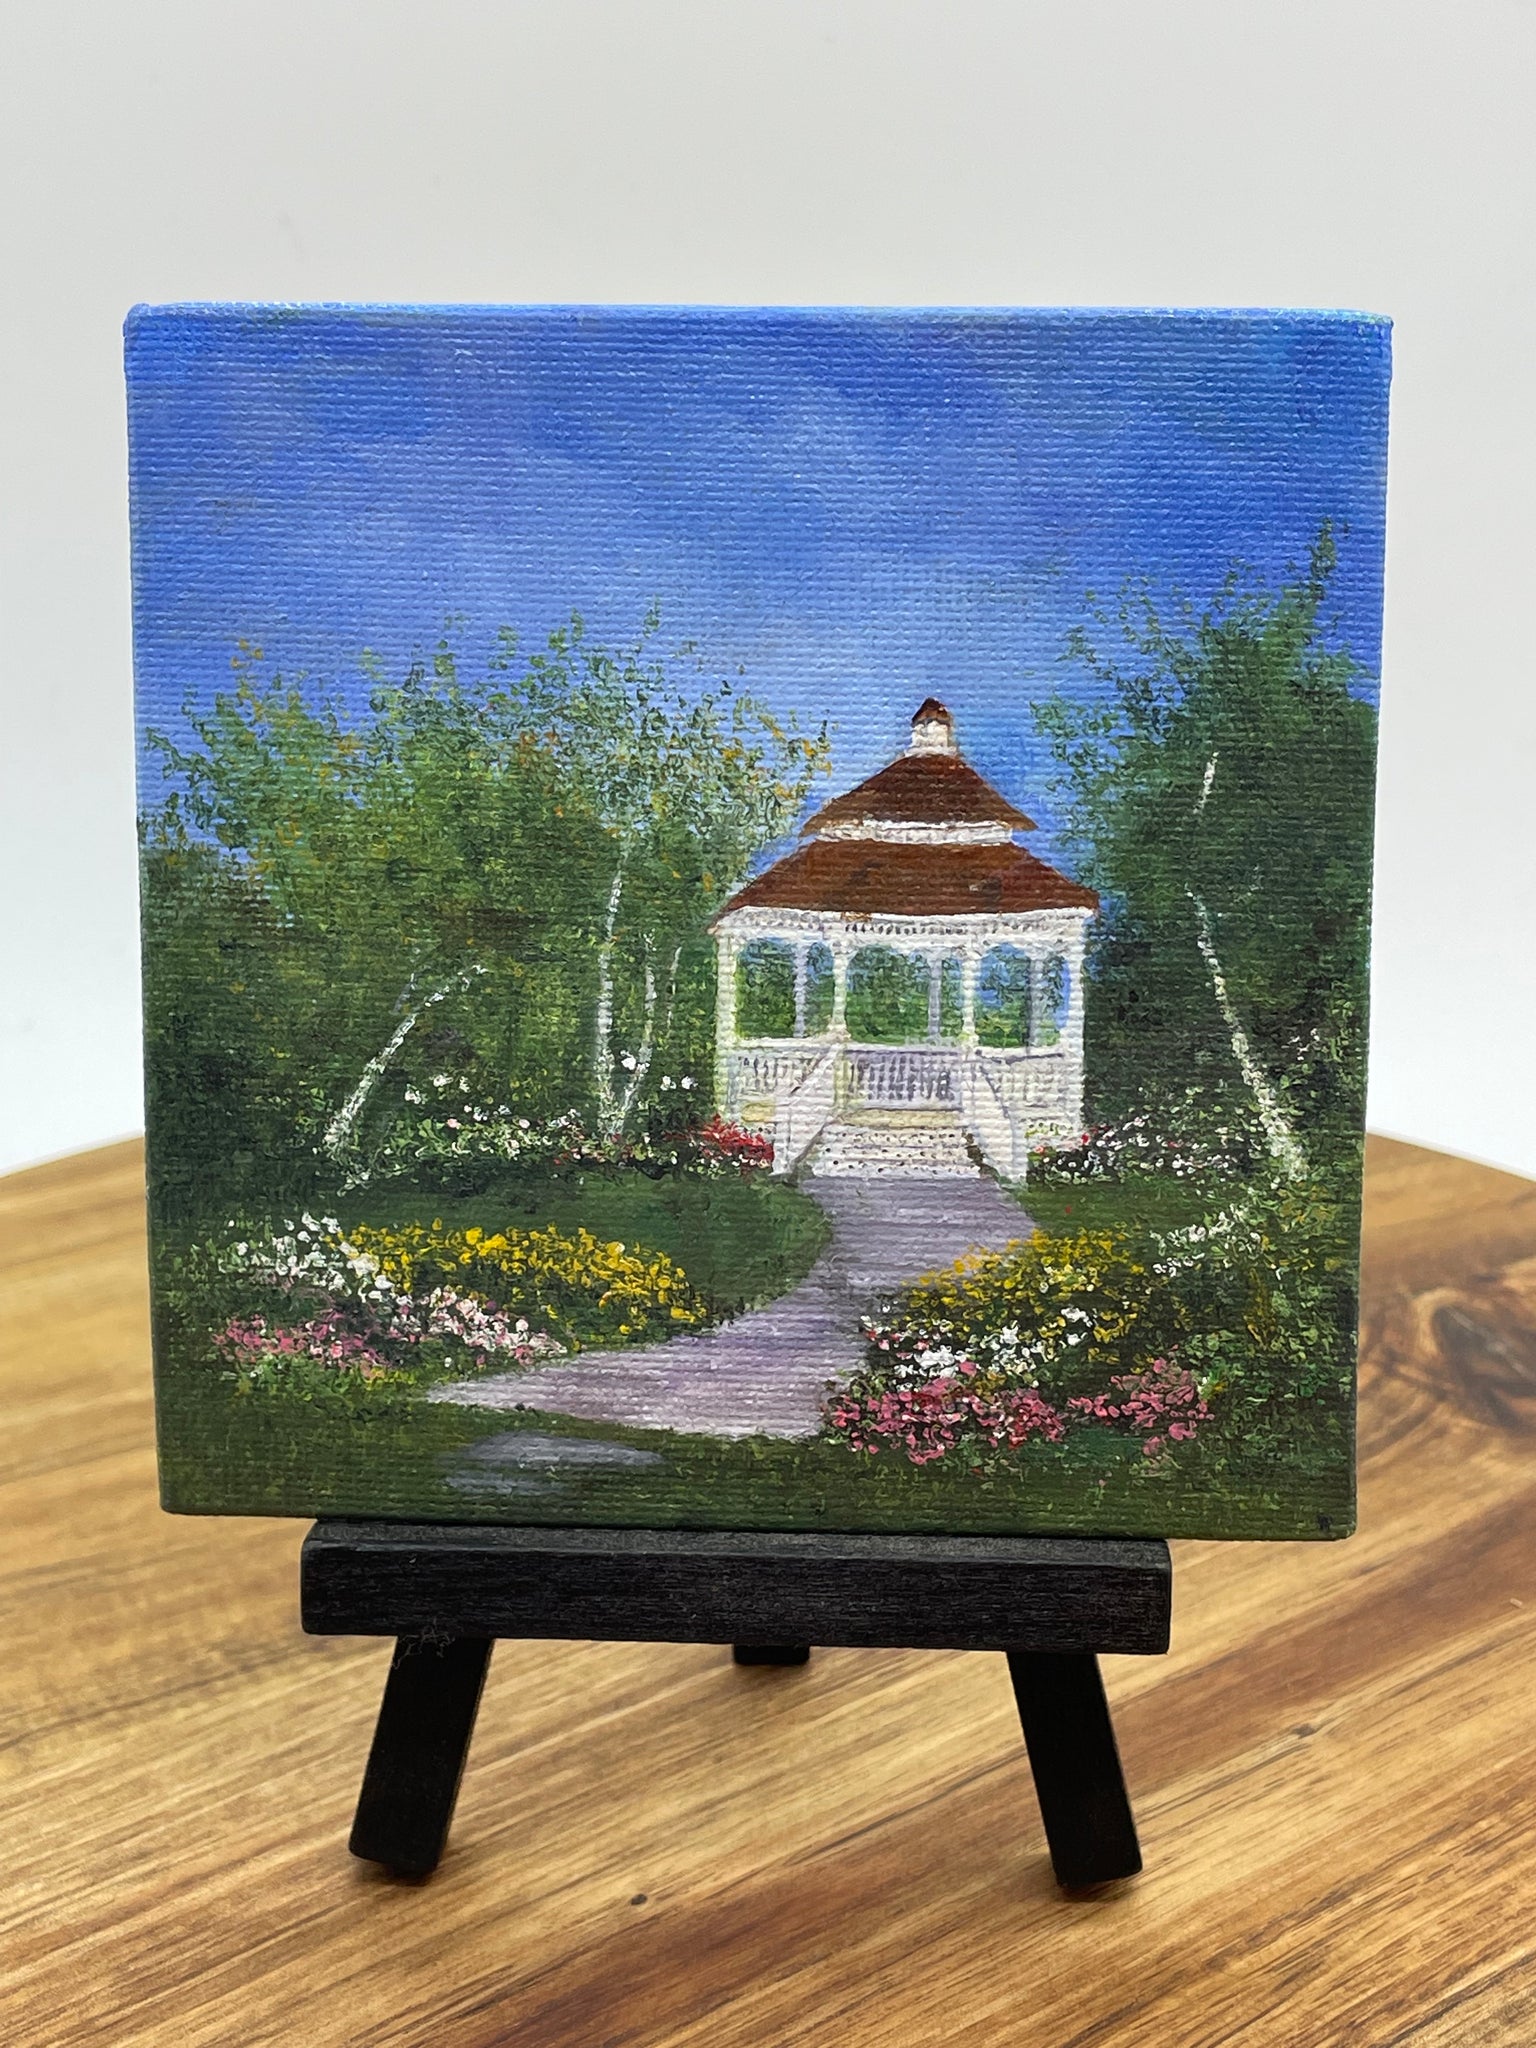 4x4 Oil, Mission Pte. Gazebo with Easle